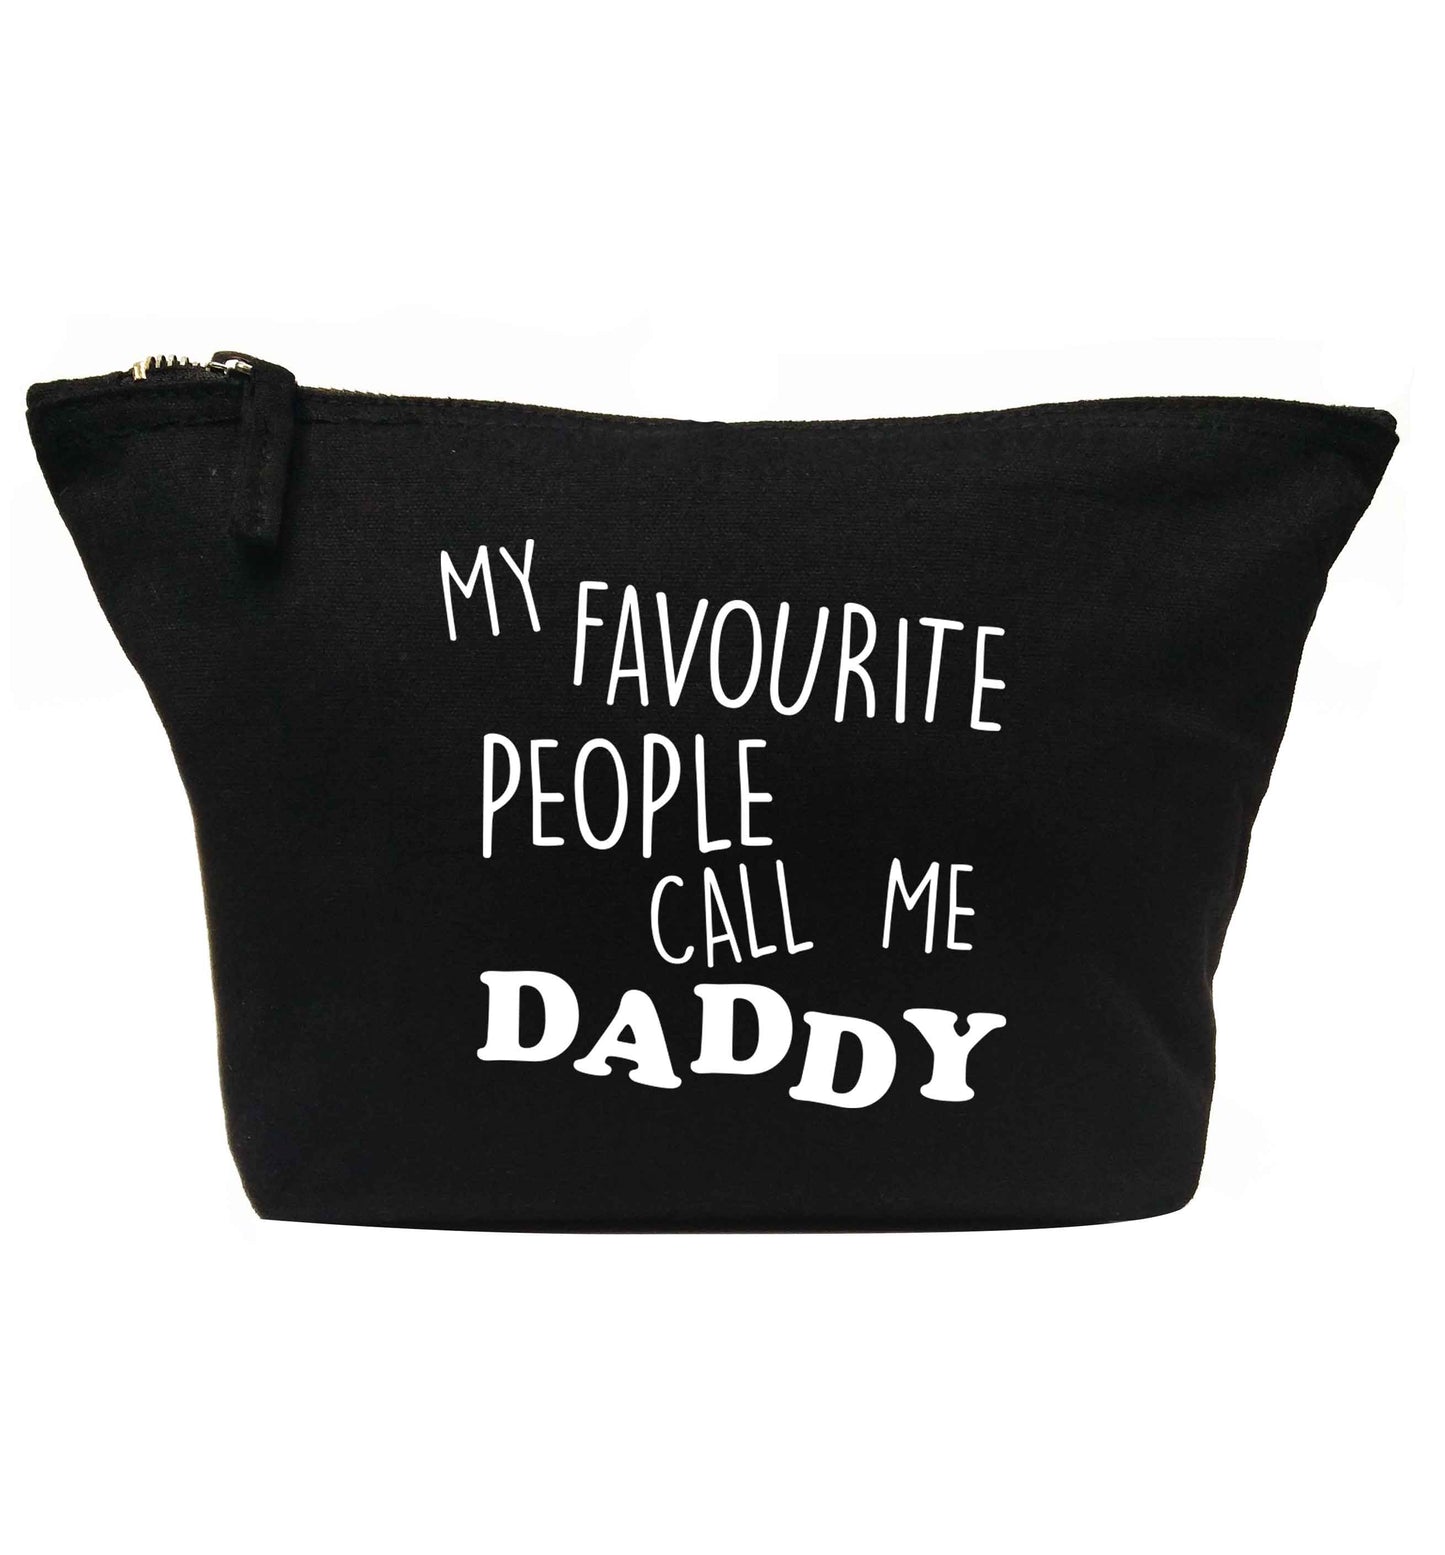 My favourite people call me daddy | Makeup / wash bag